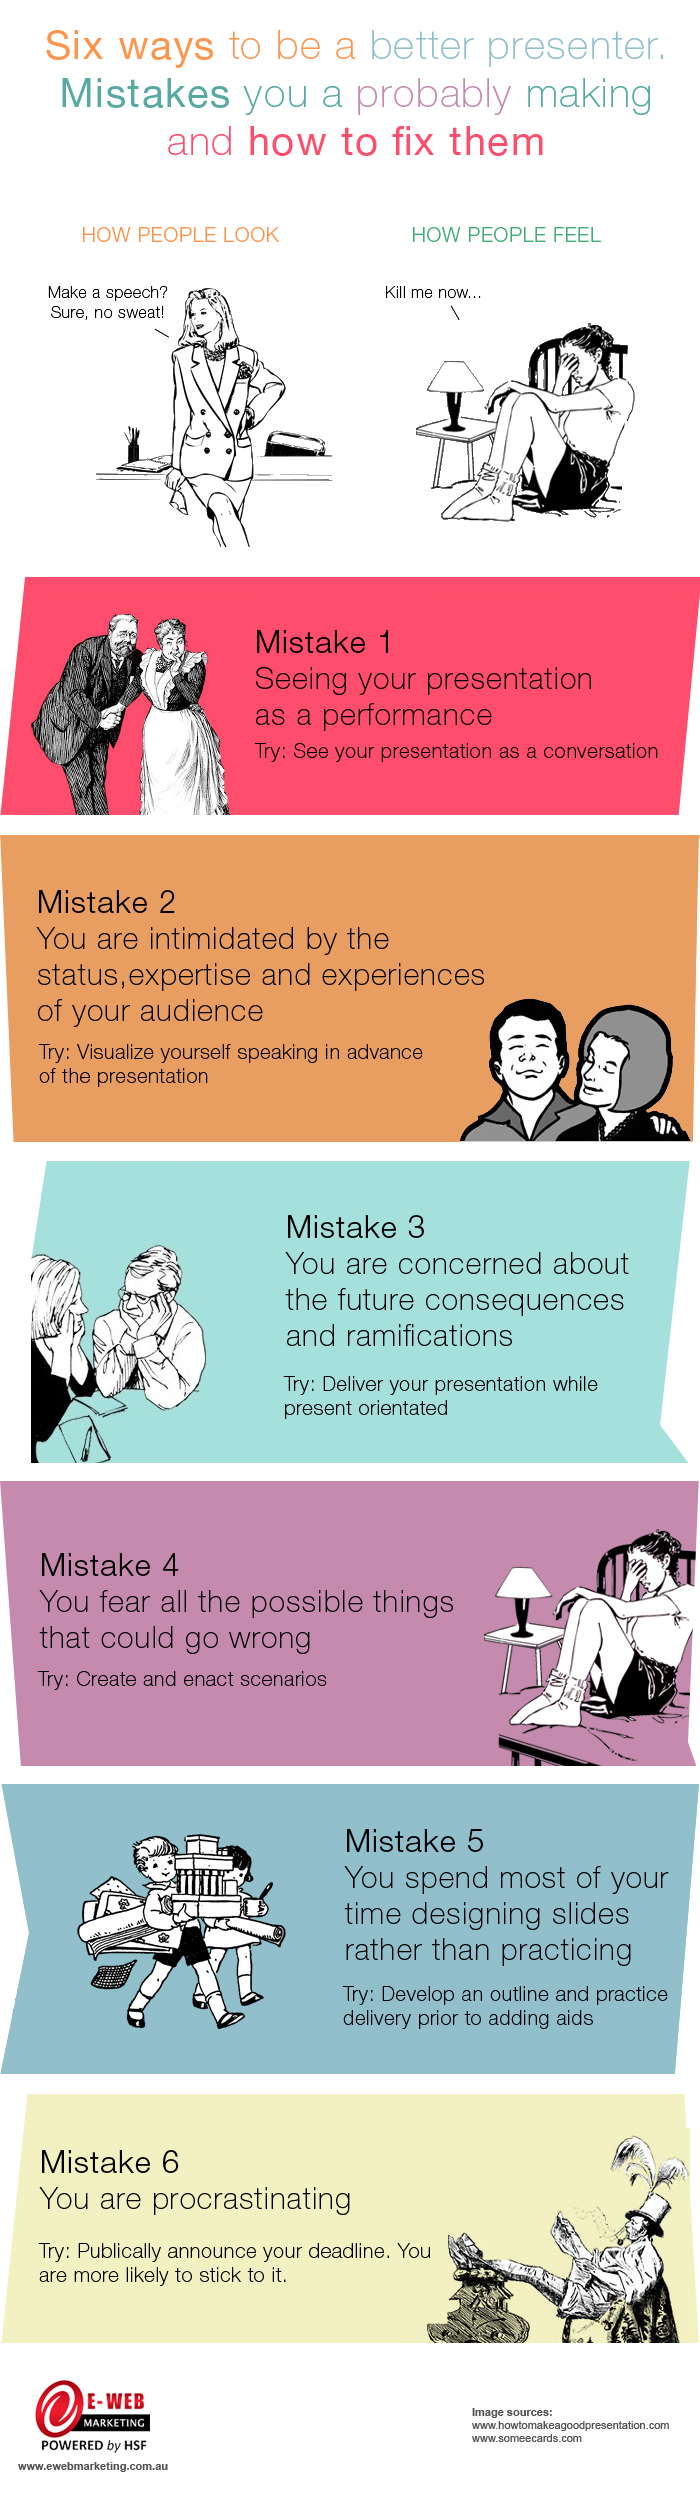 6 Ways to Rid Stage Fright During Presentations